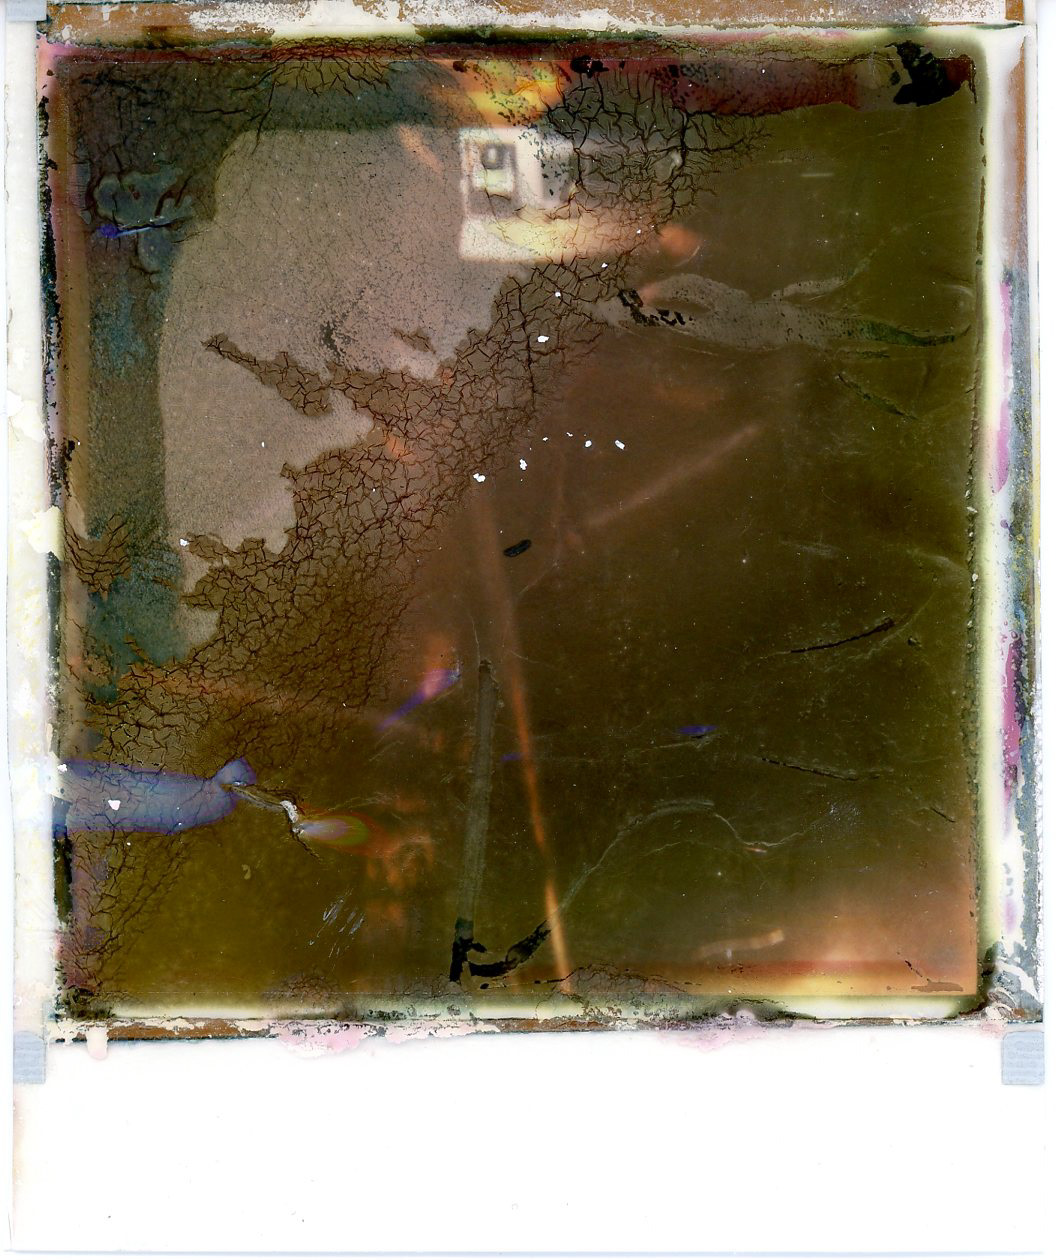 POLAROID Destroyed Composite Faded Desaturated New Methods